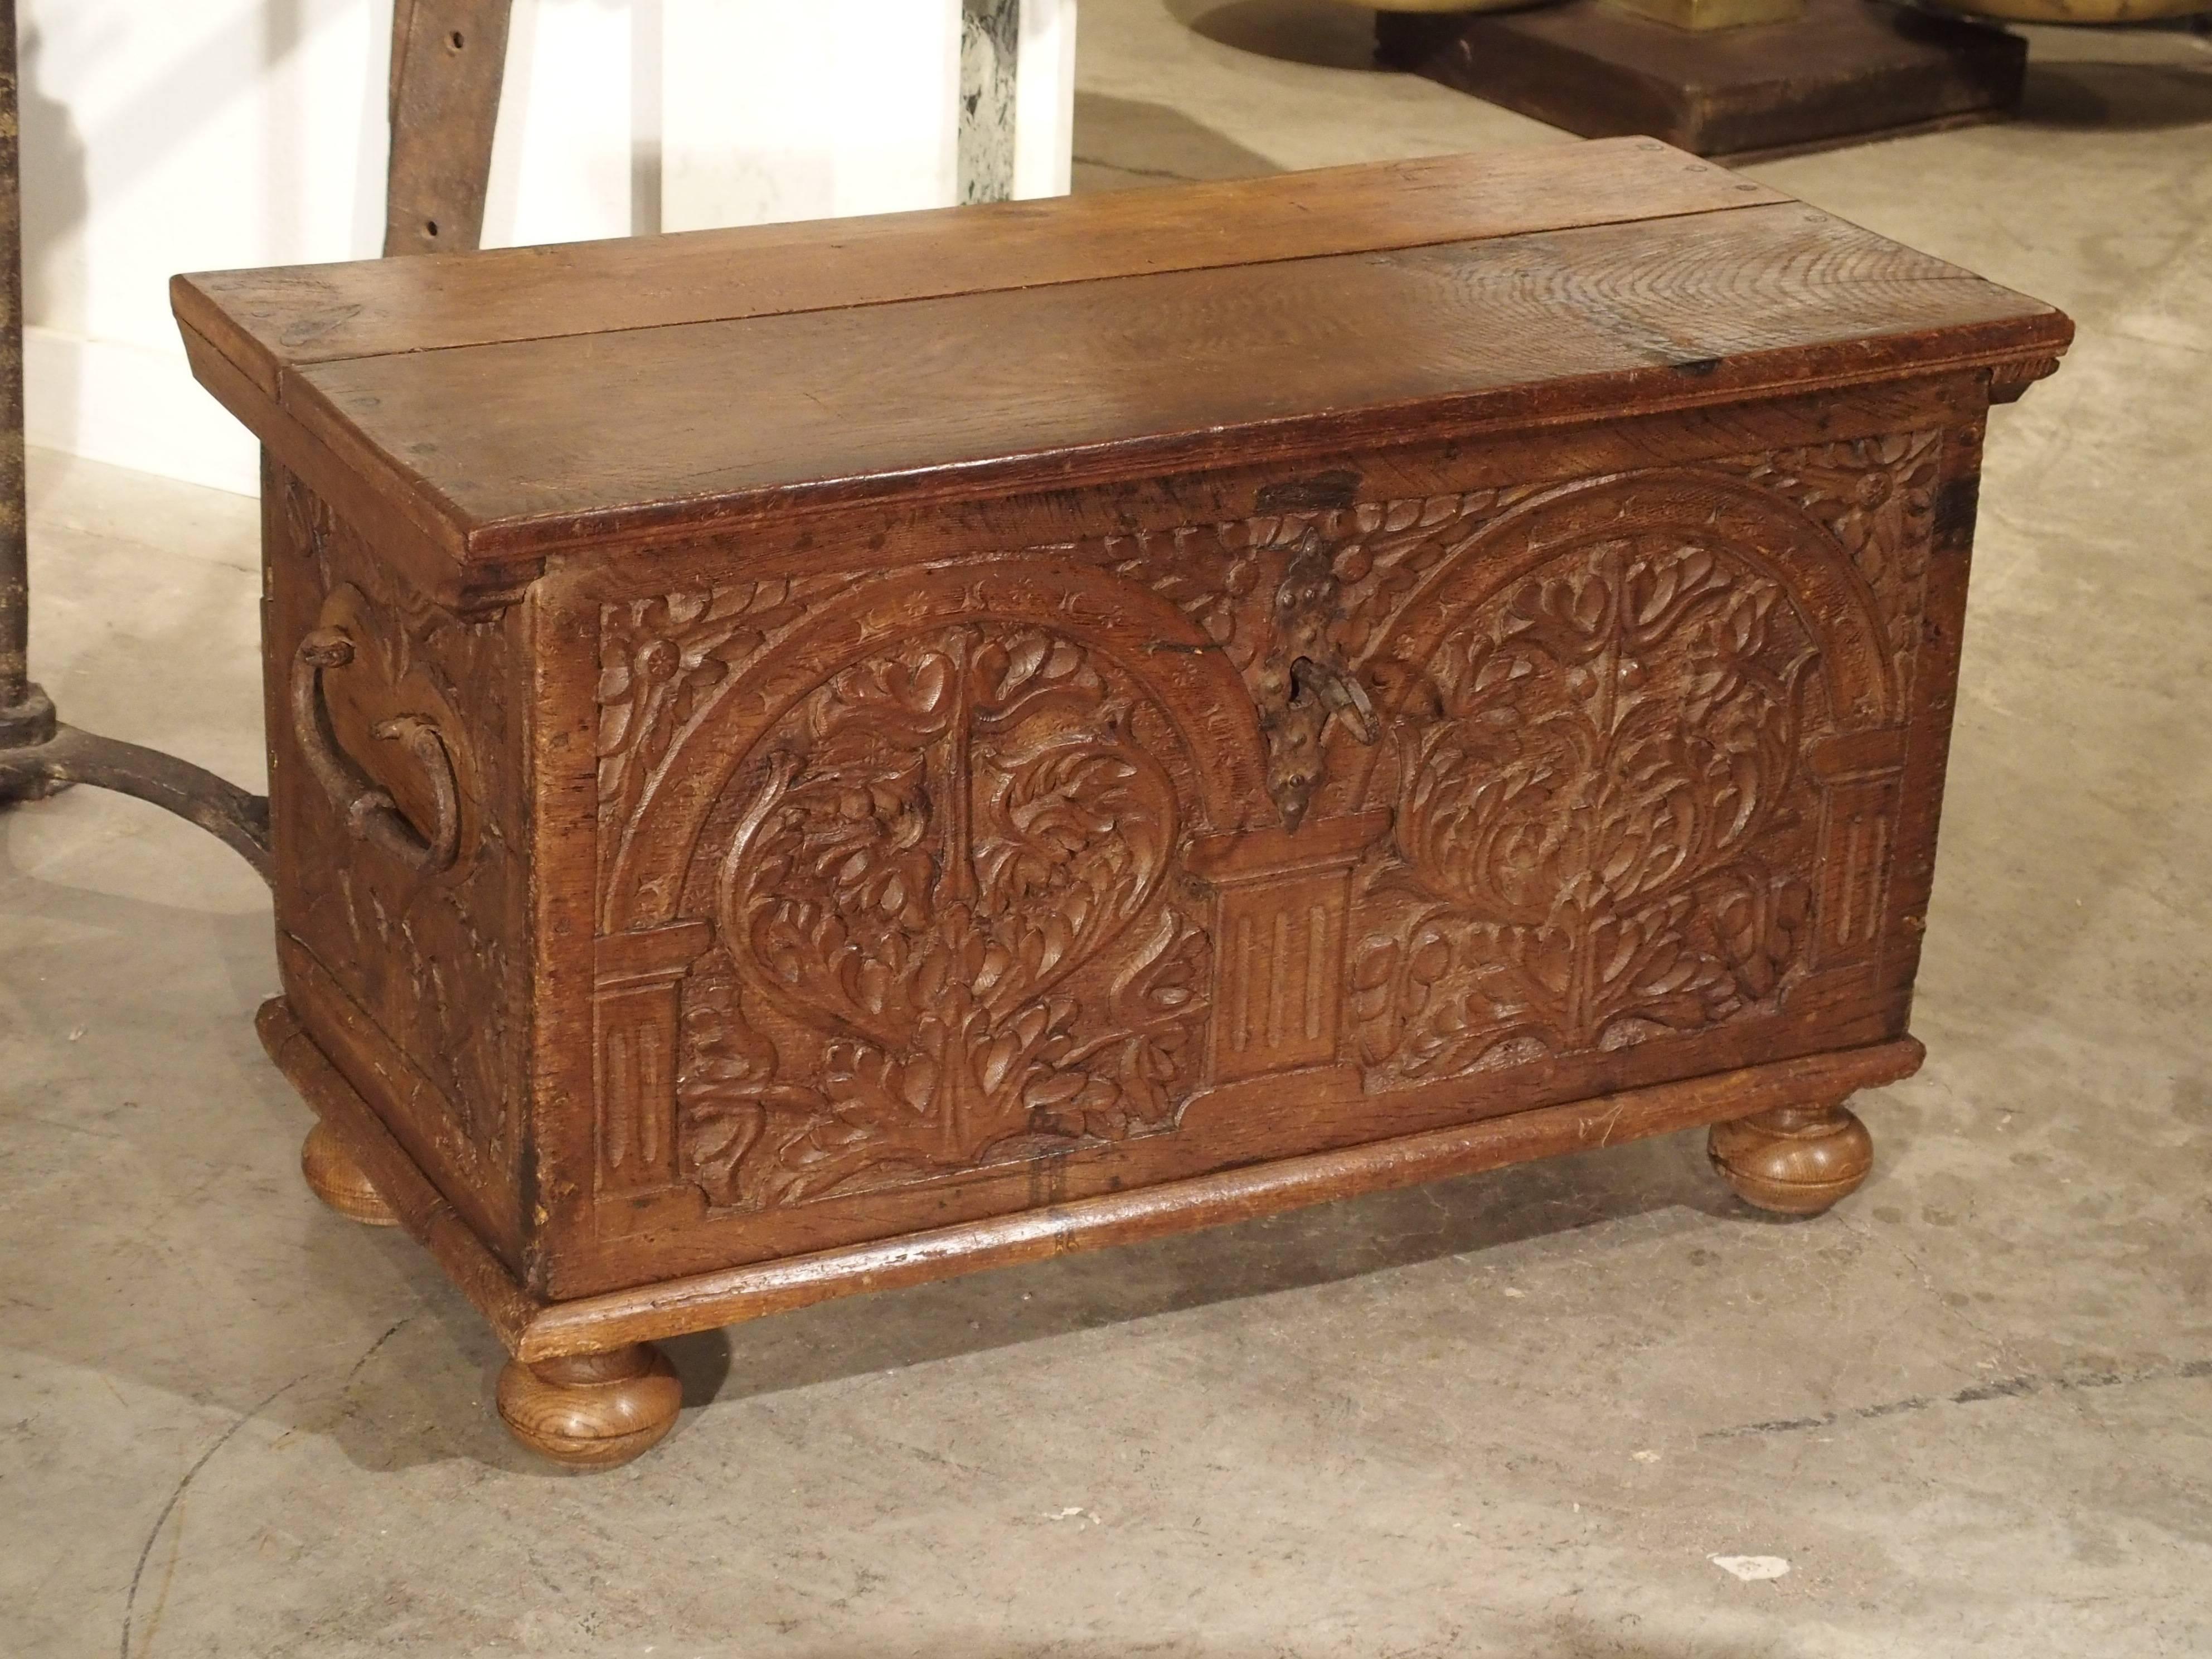 Wrought Iron 17th Century Carved Oak Trunk with Detailed Arcading and Foliate Motifs